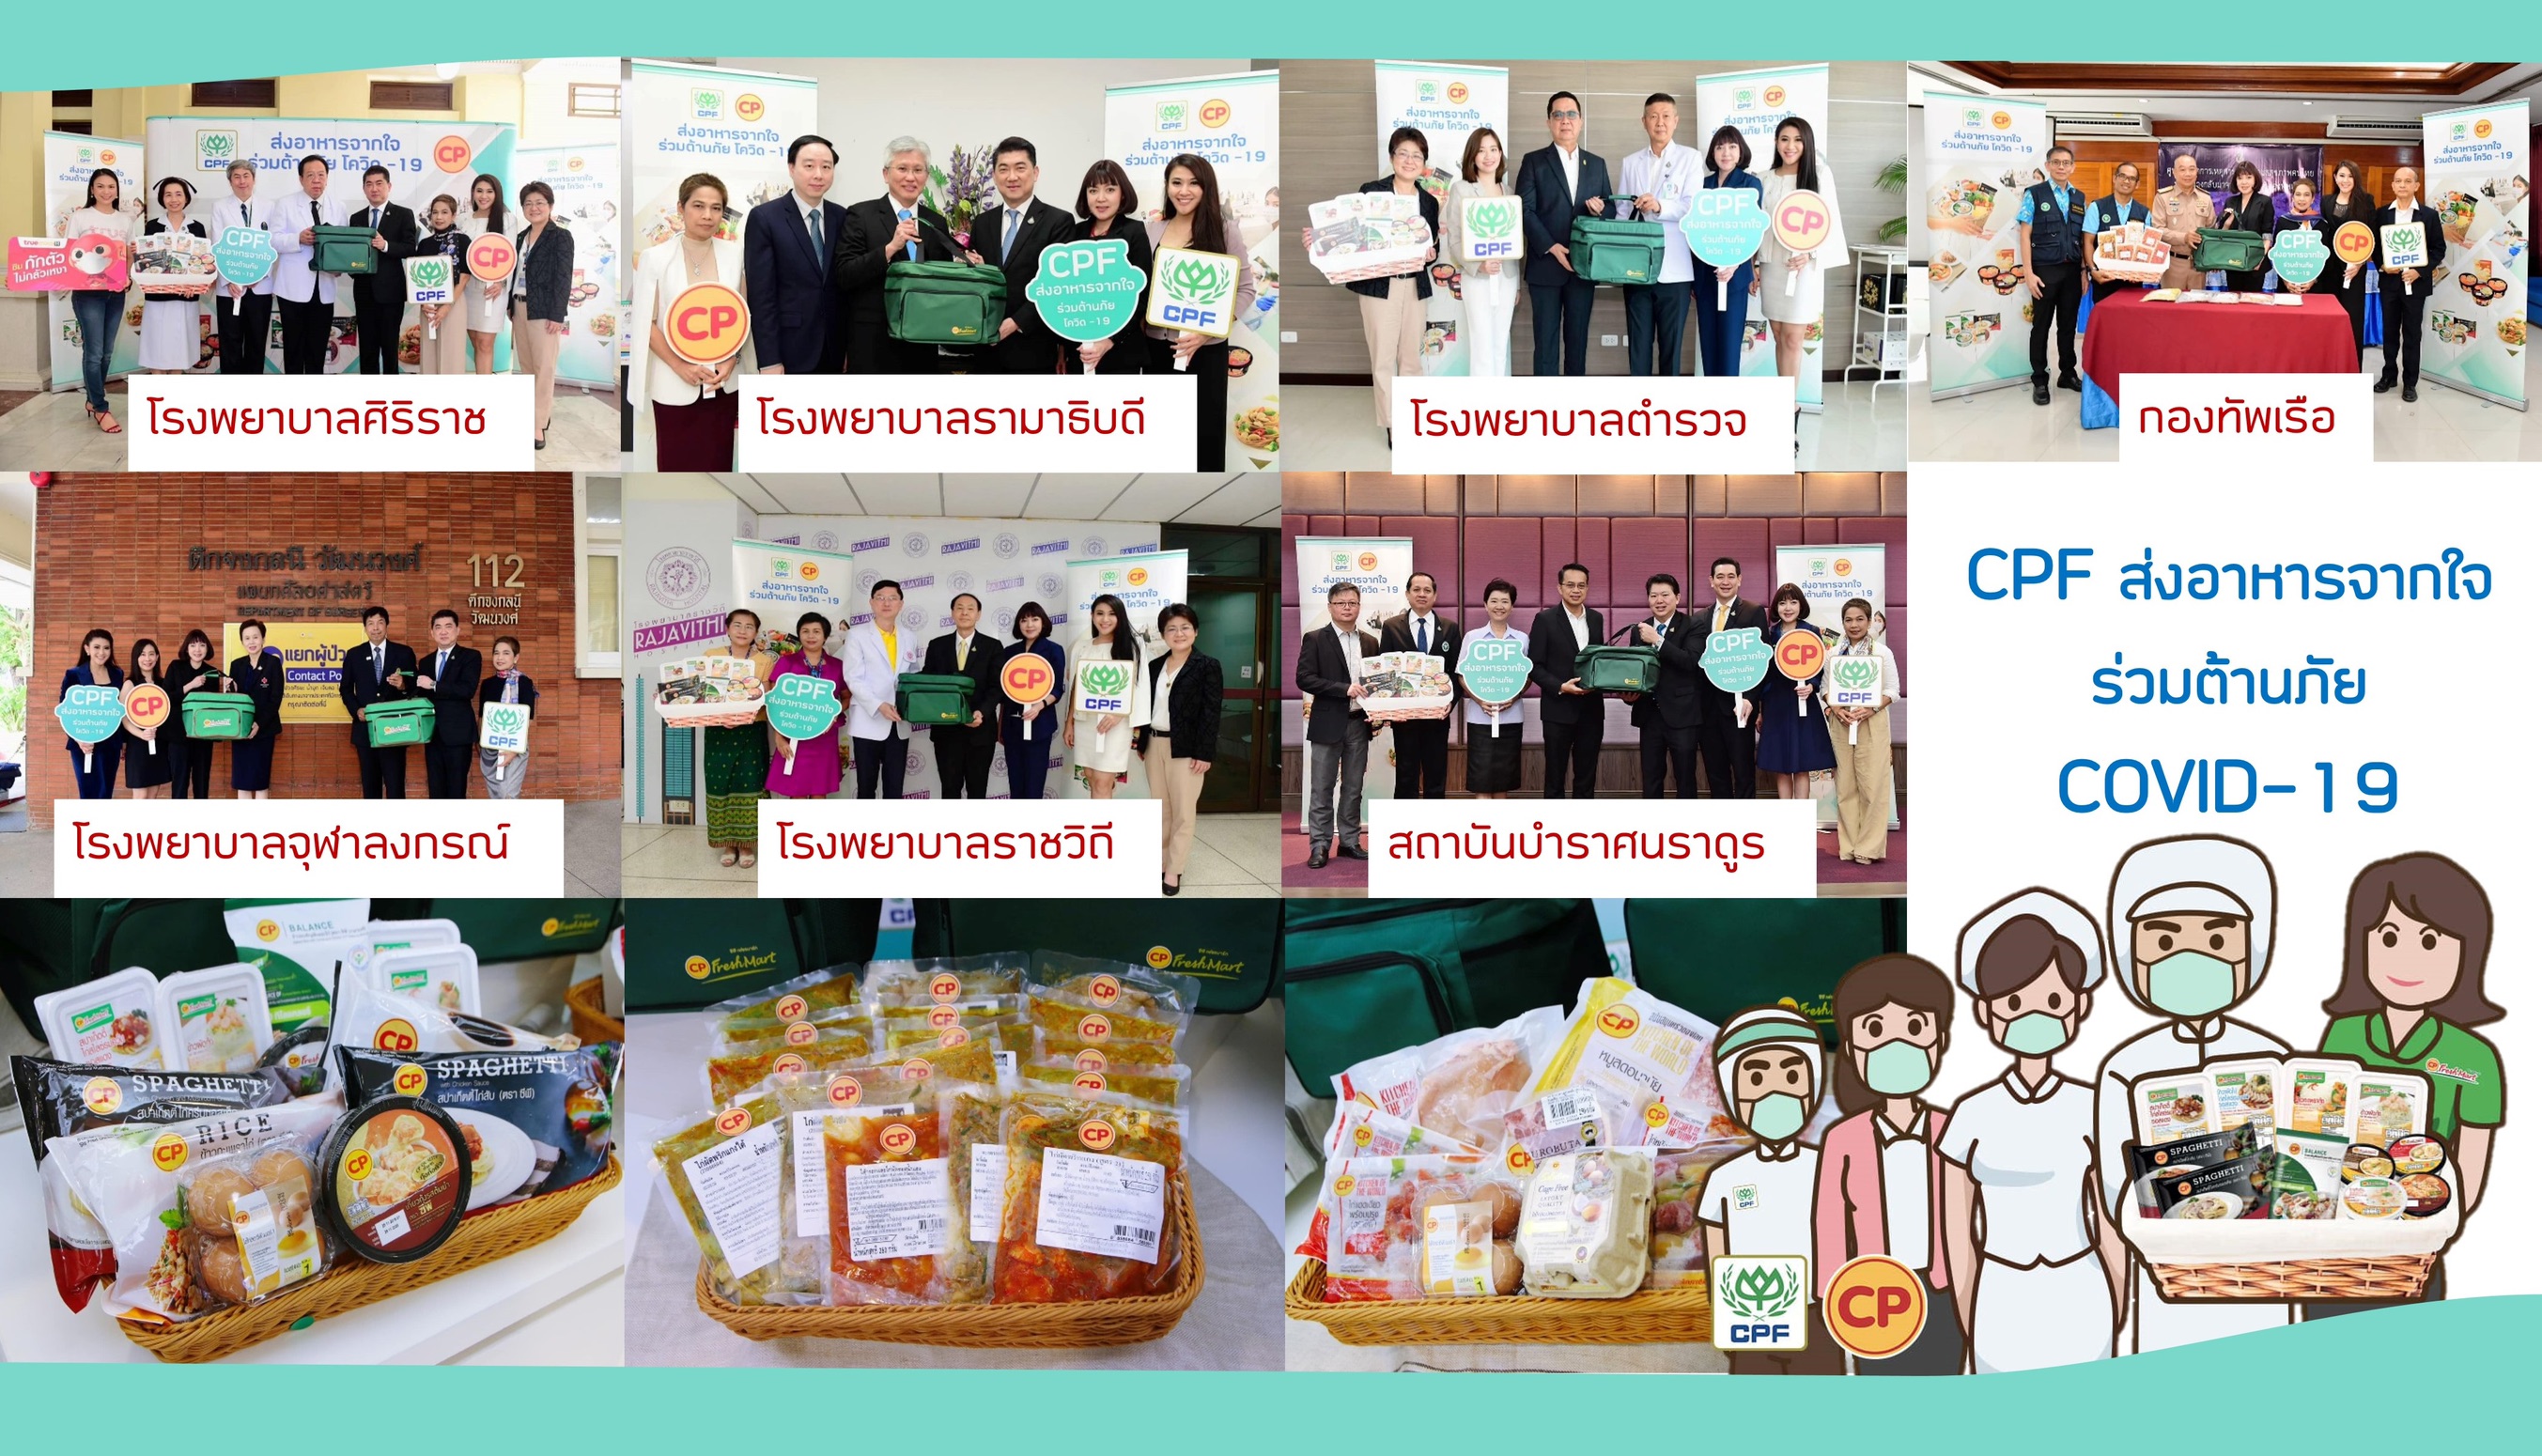 More than 40 public hospitals nationwide receive food products from CPF to battle against COVID-19